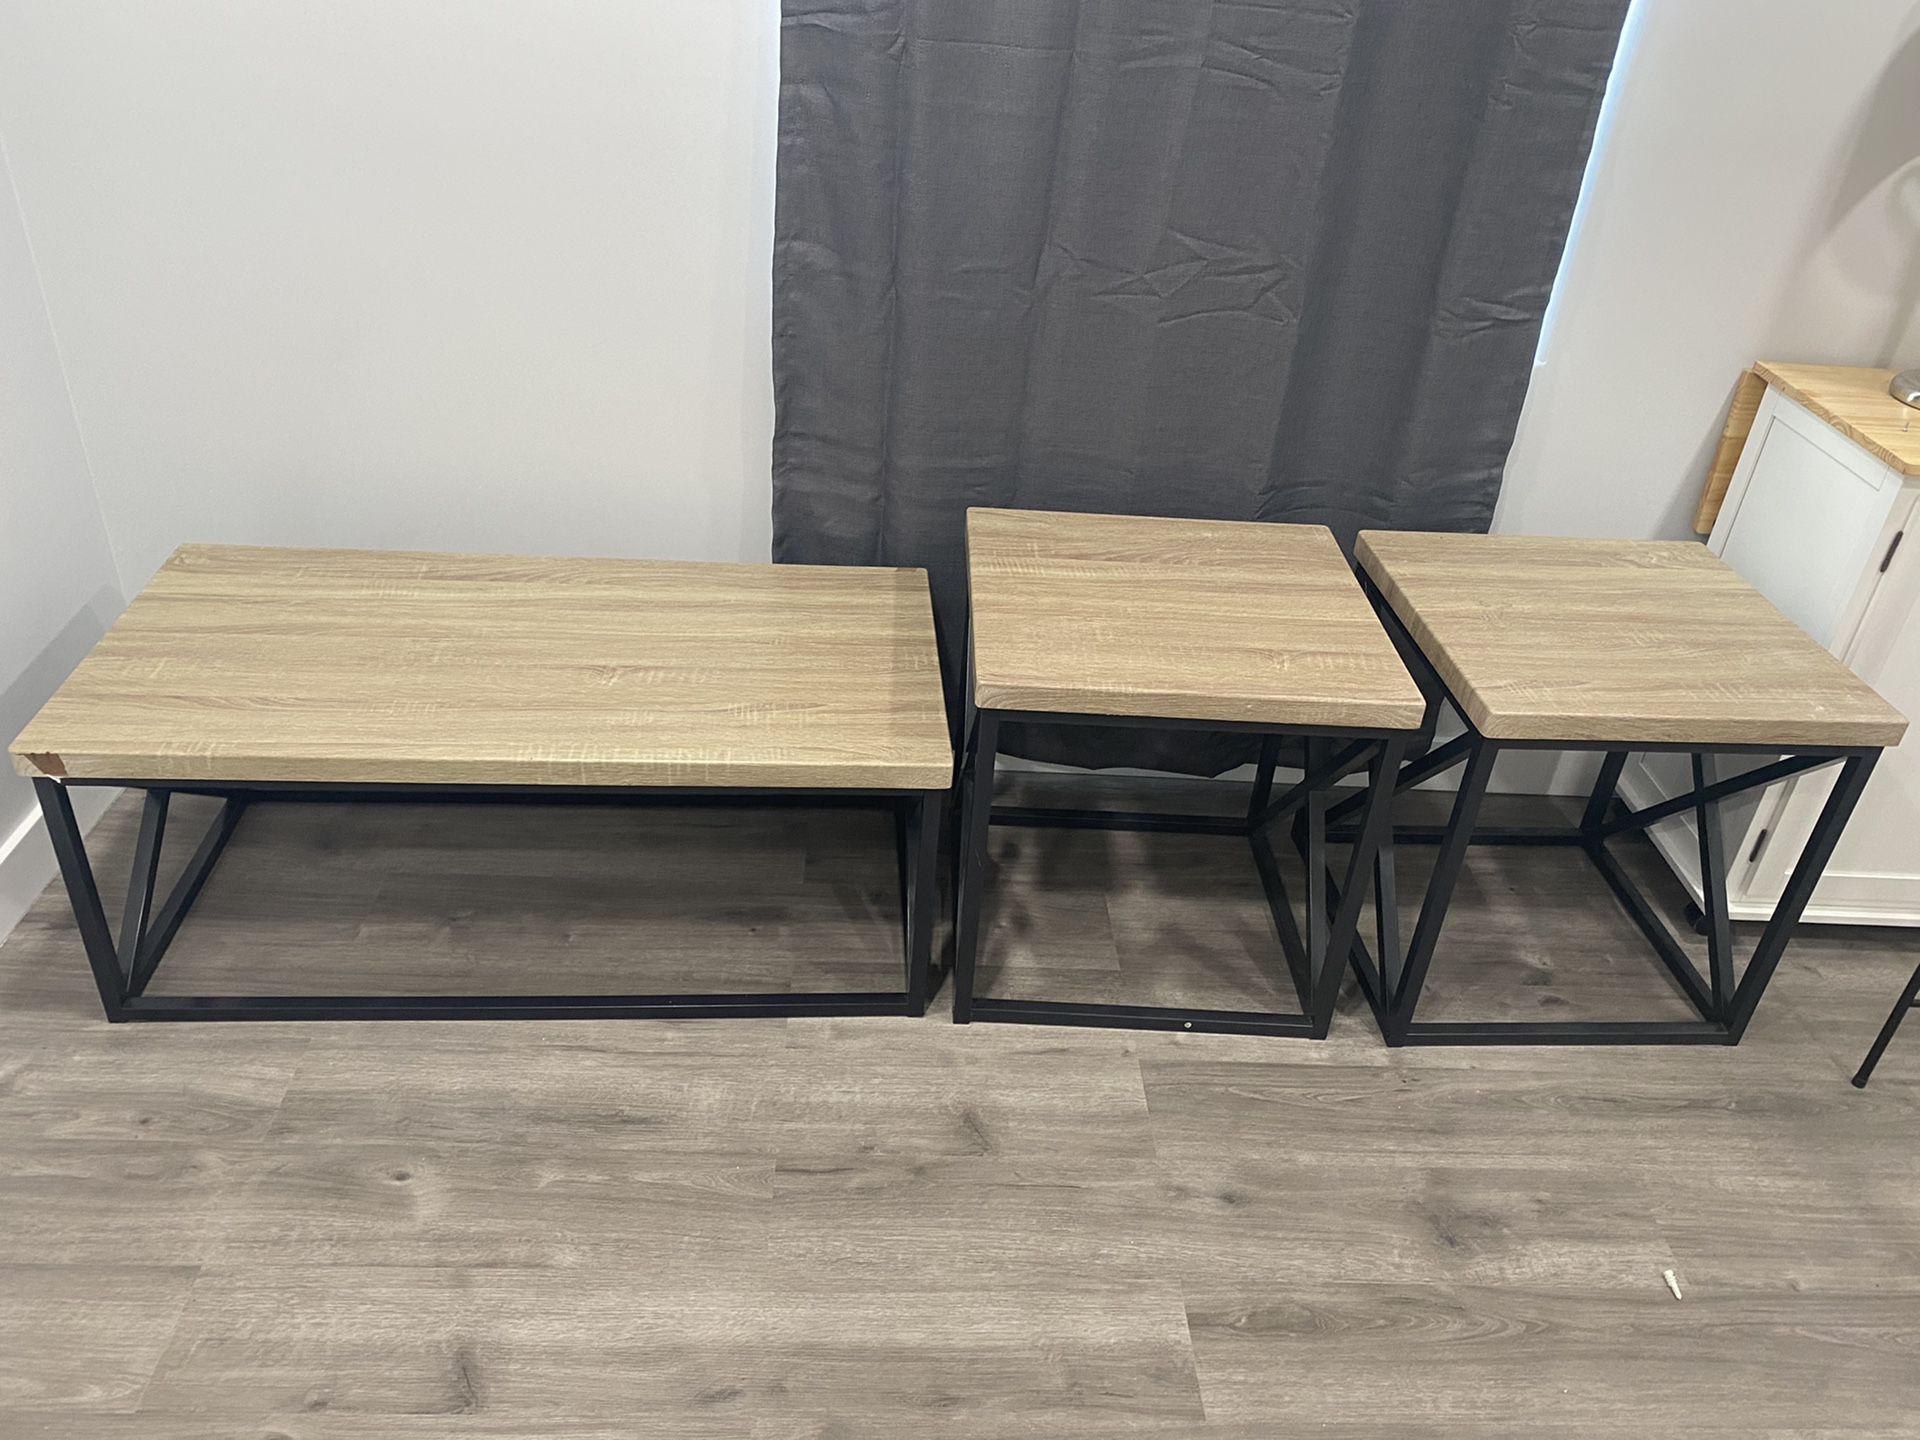 COFFEE TABLE & 2 END TABLES